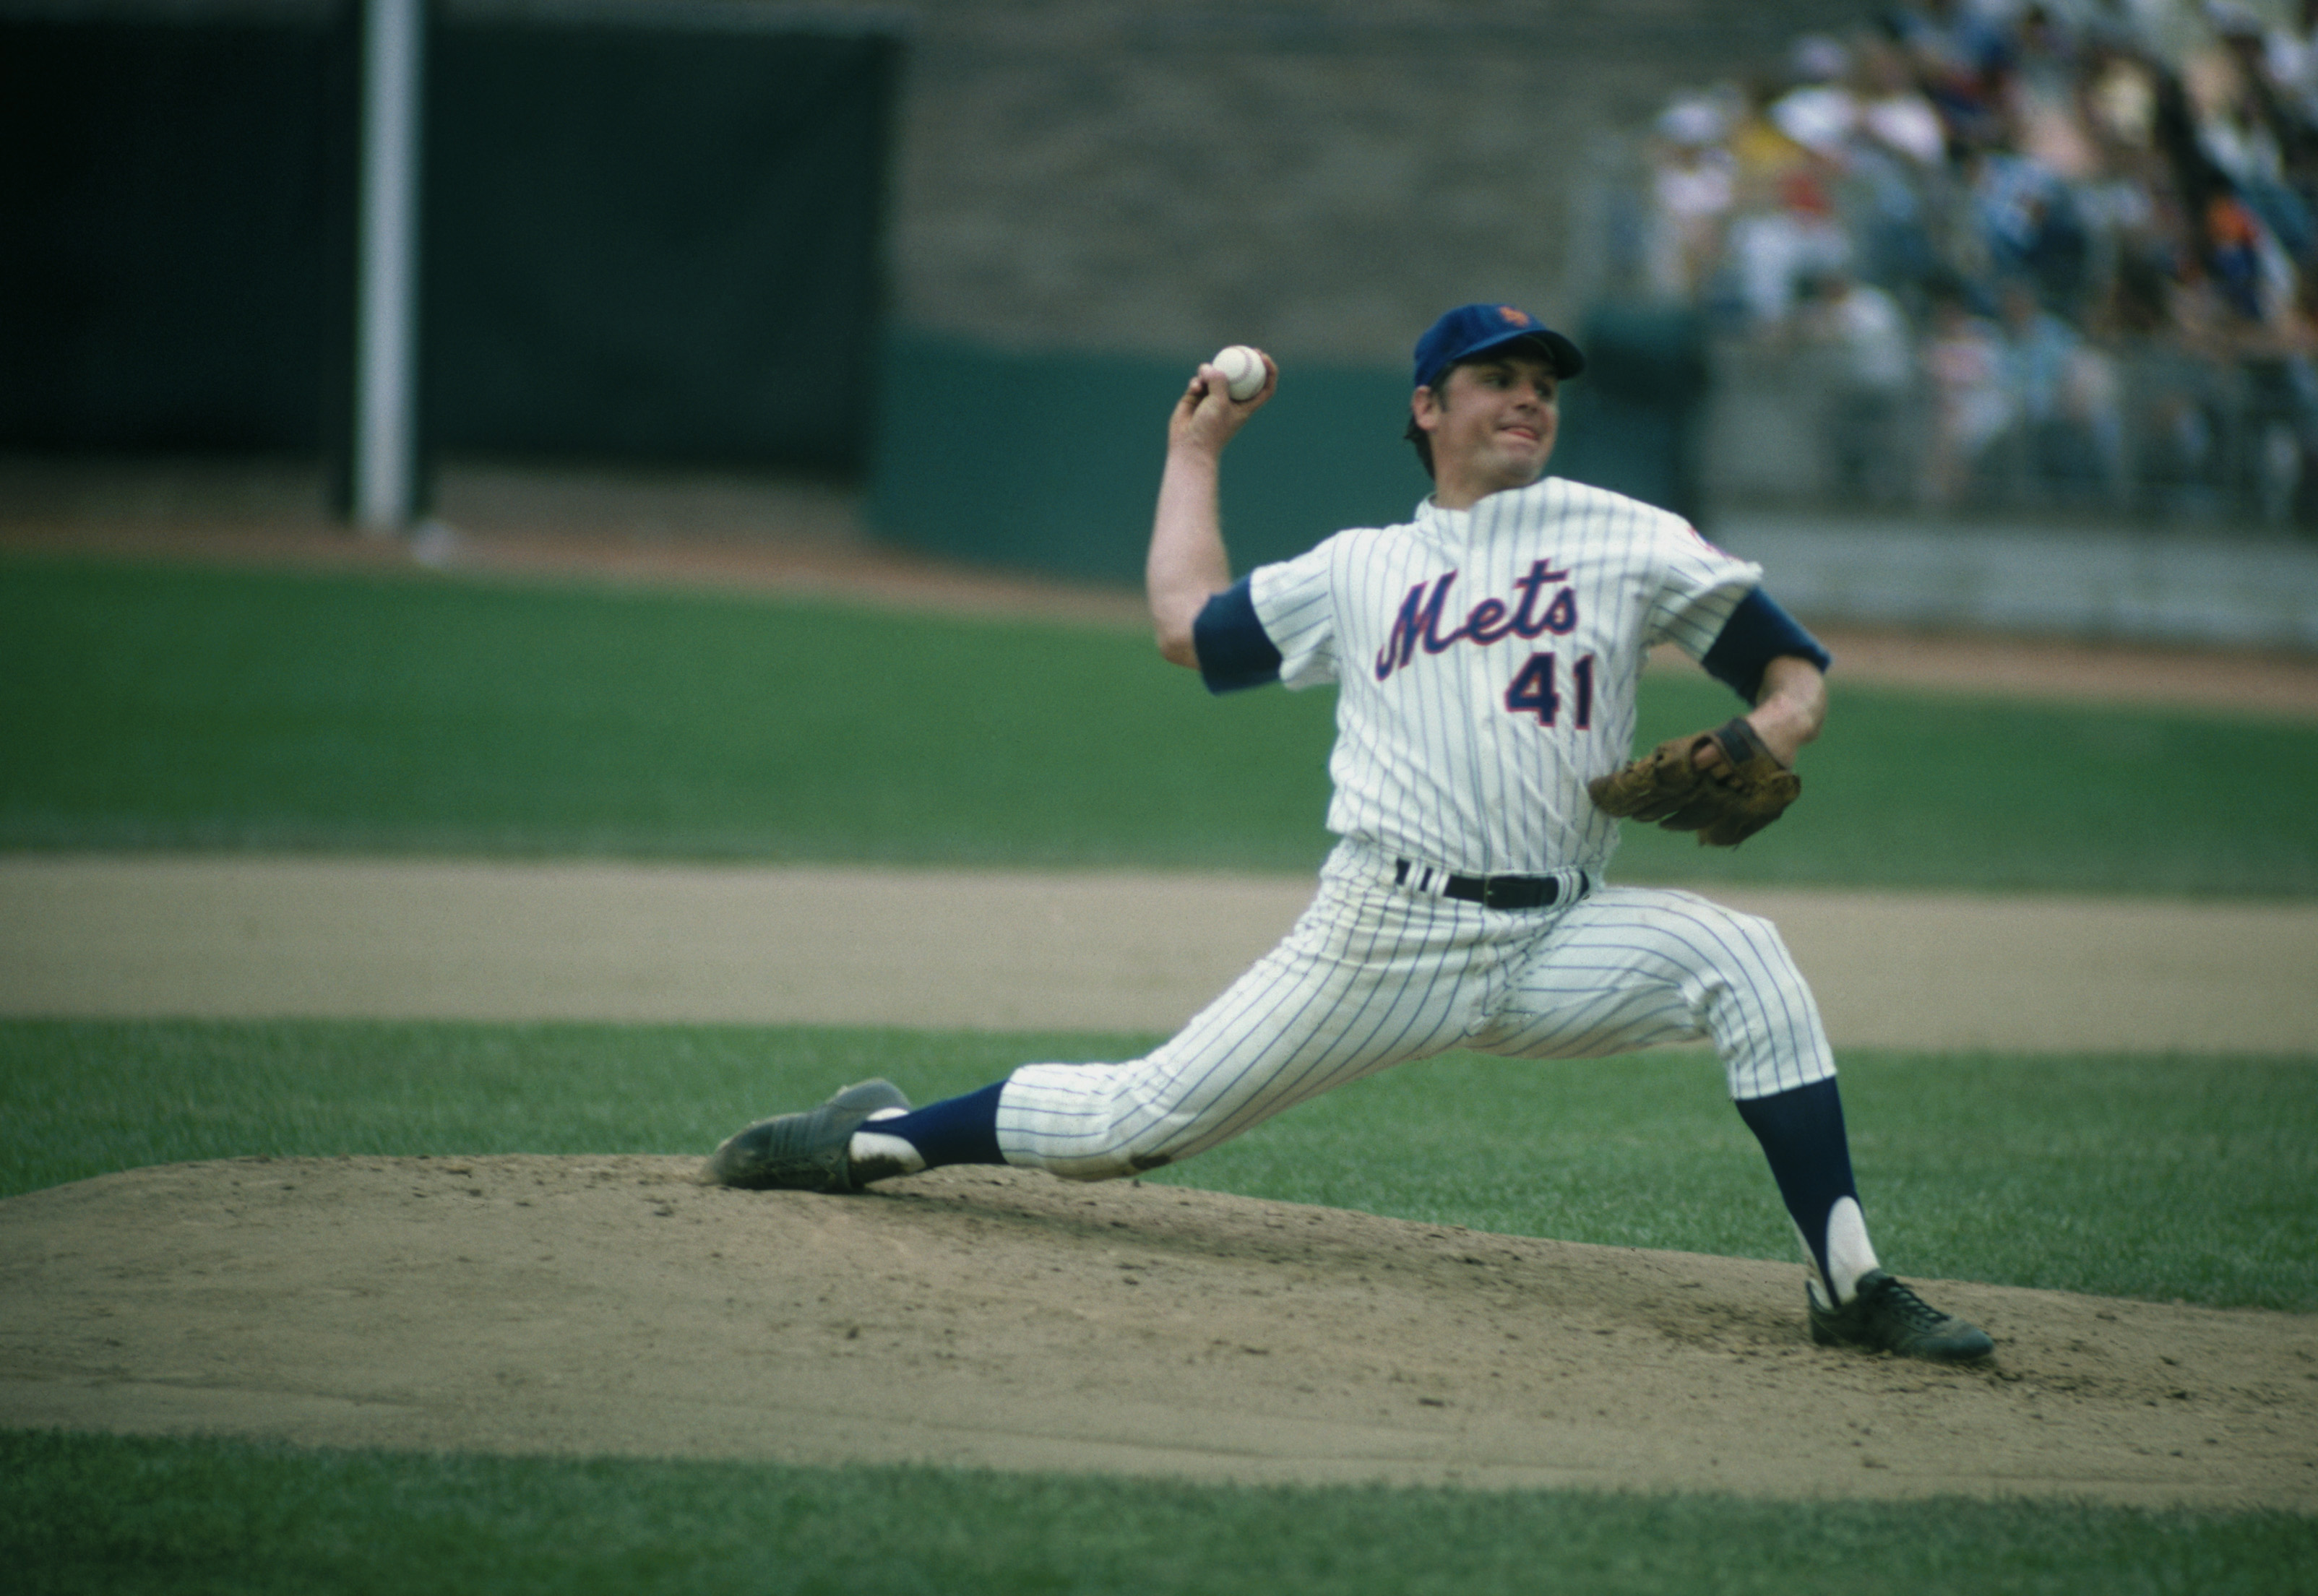 Tom Seaver, Heart and Mighty Arm of Miracle Mets, Dies at 75